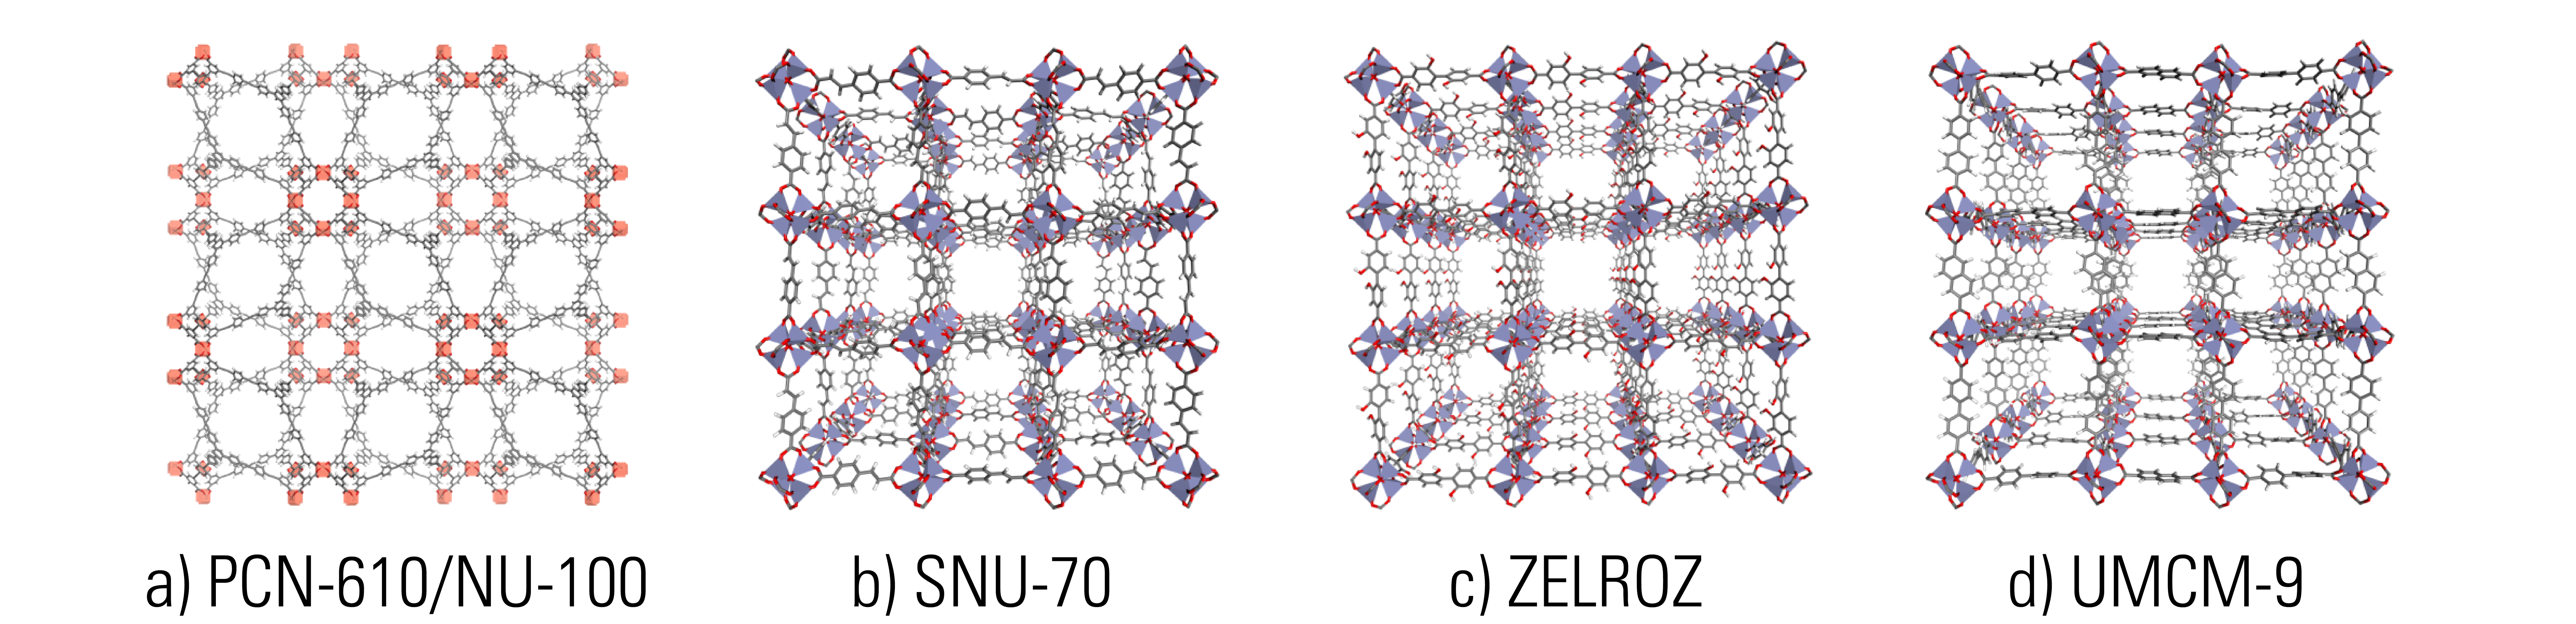 Metal organic frameworks, or MOFs, are designer materials comprised of metal ions coupled 